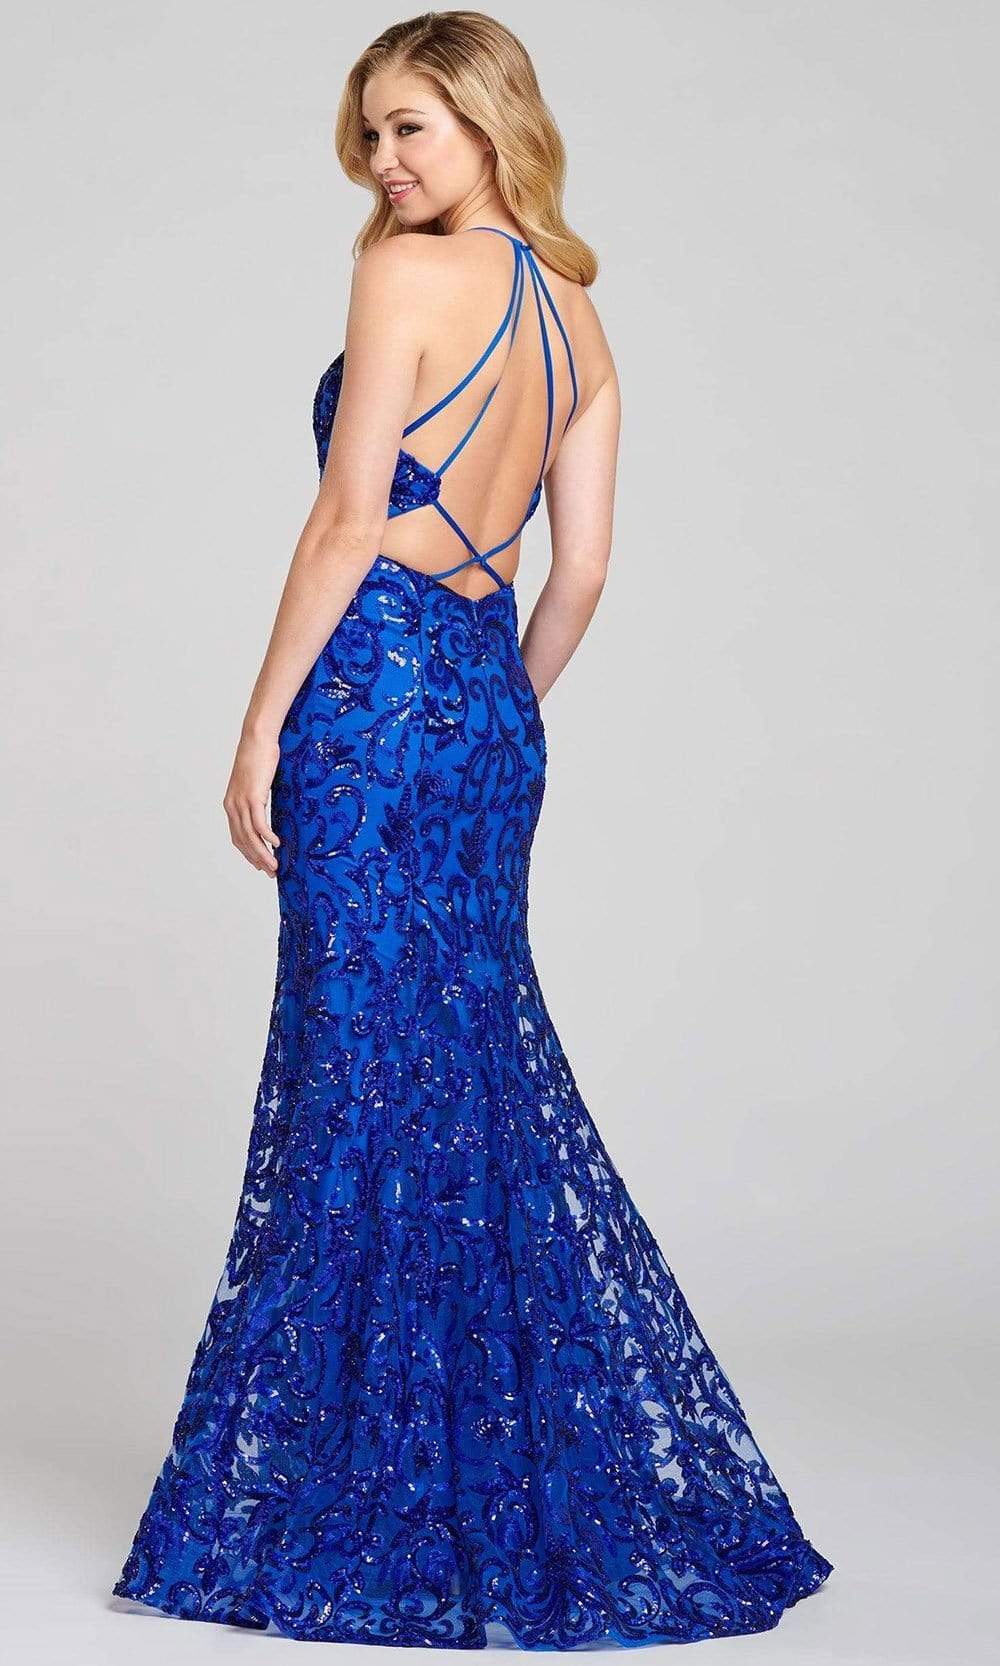 Colette for Mon Cheri - CL12130 Spaghetti Strap Sequined Mermaid Gown Evening Dresses